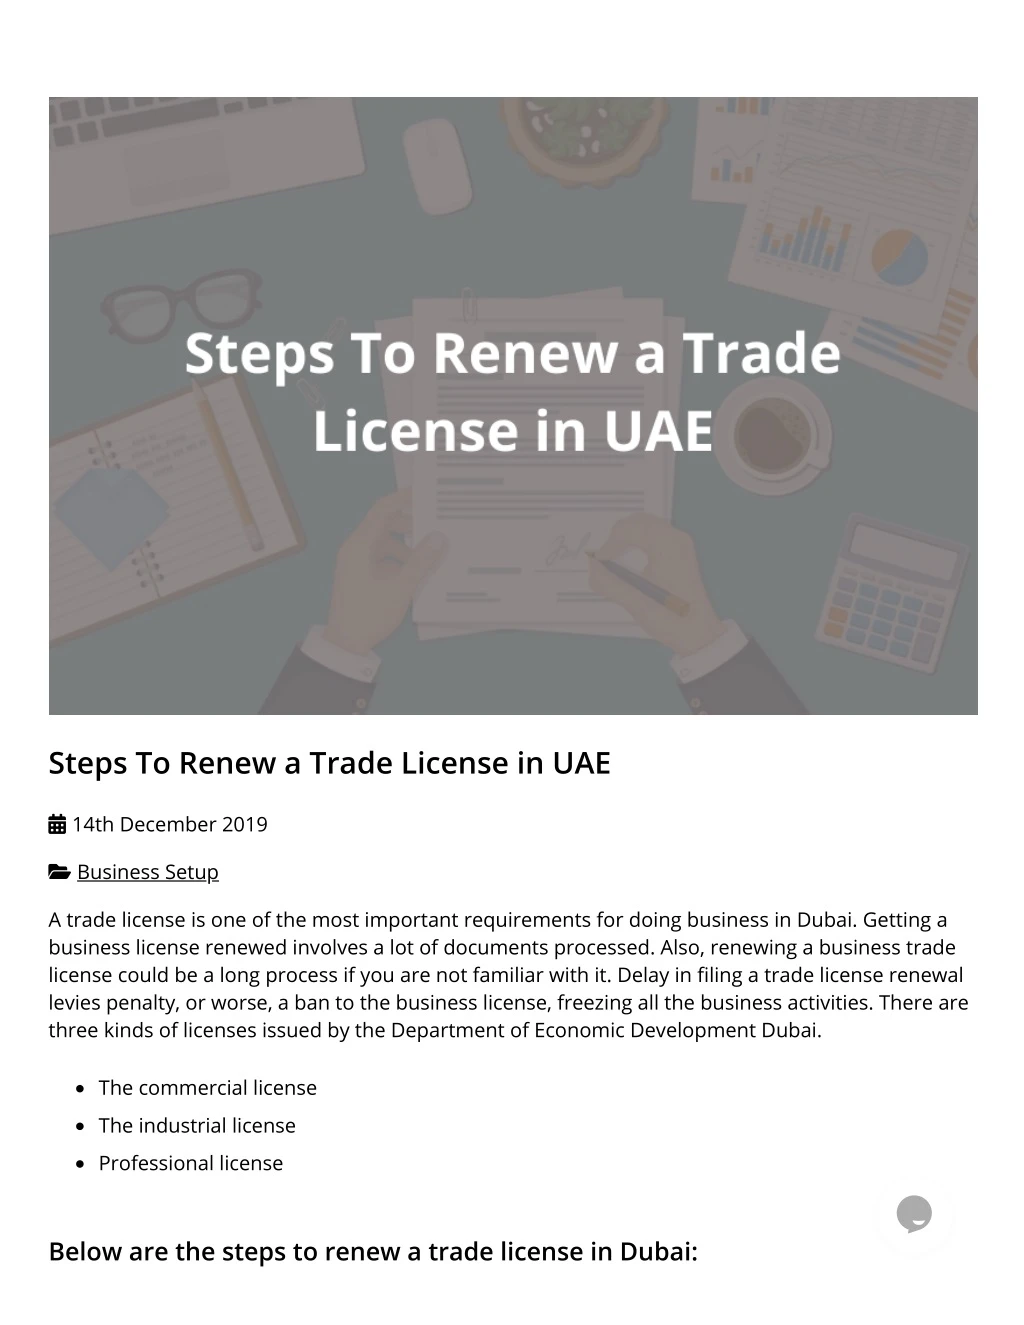 steps to renew a trade license in uae